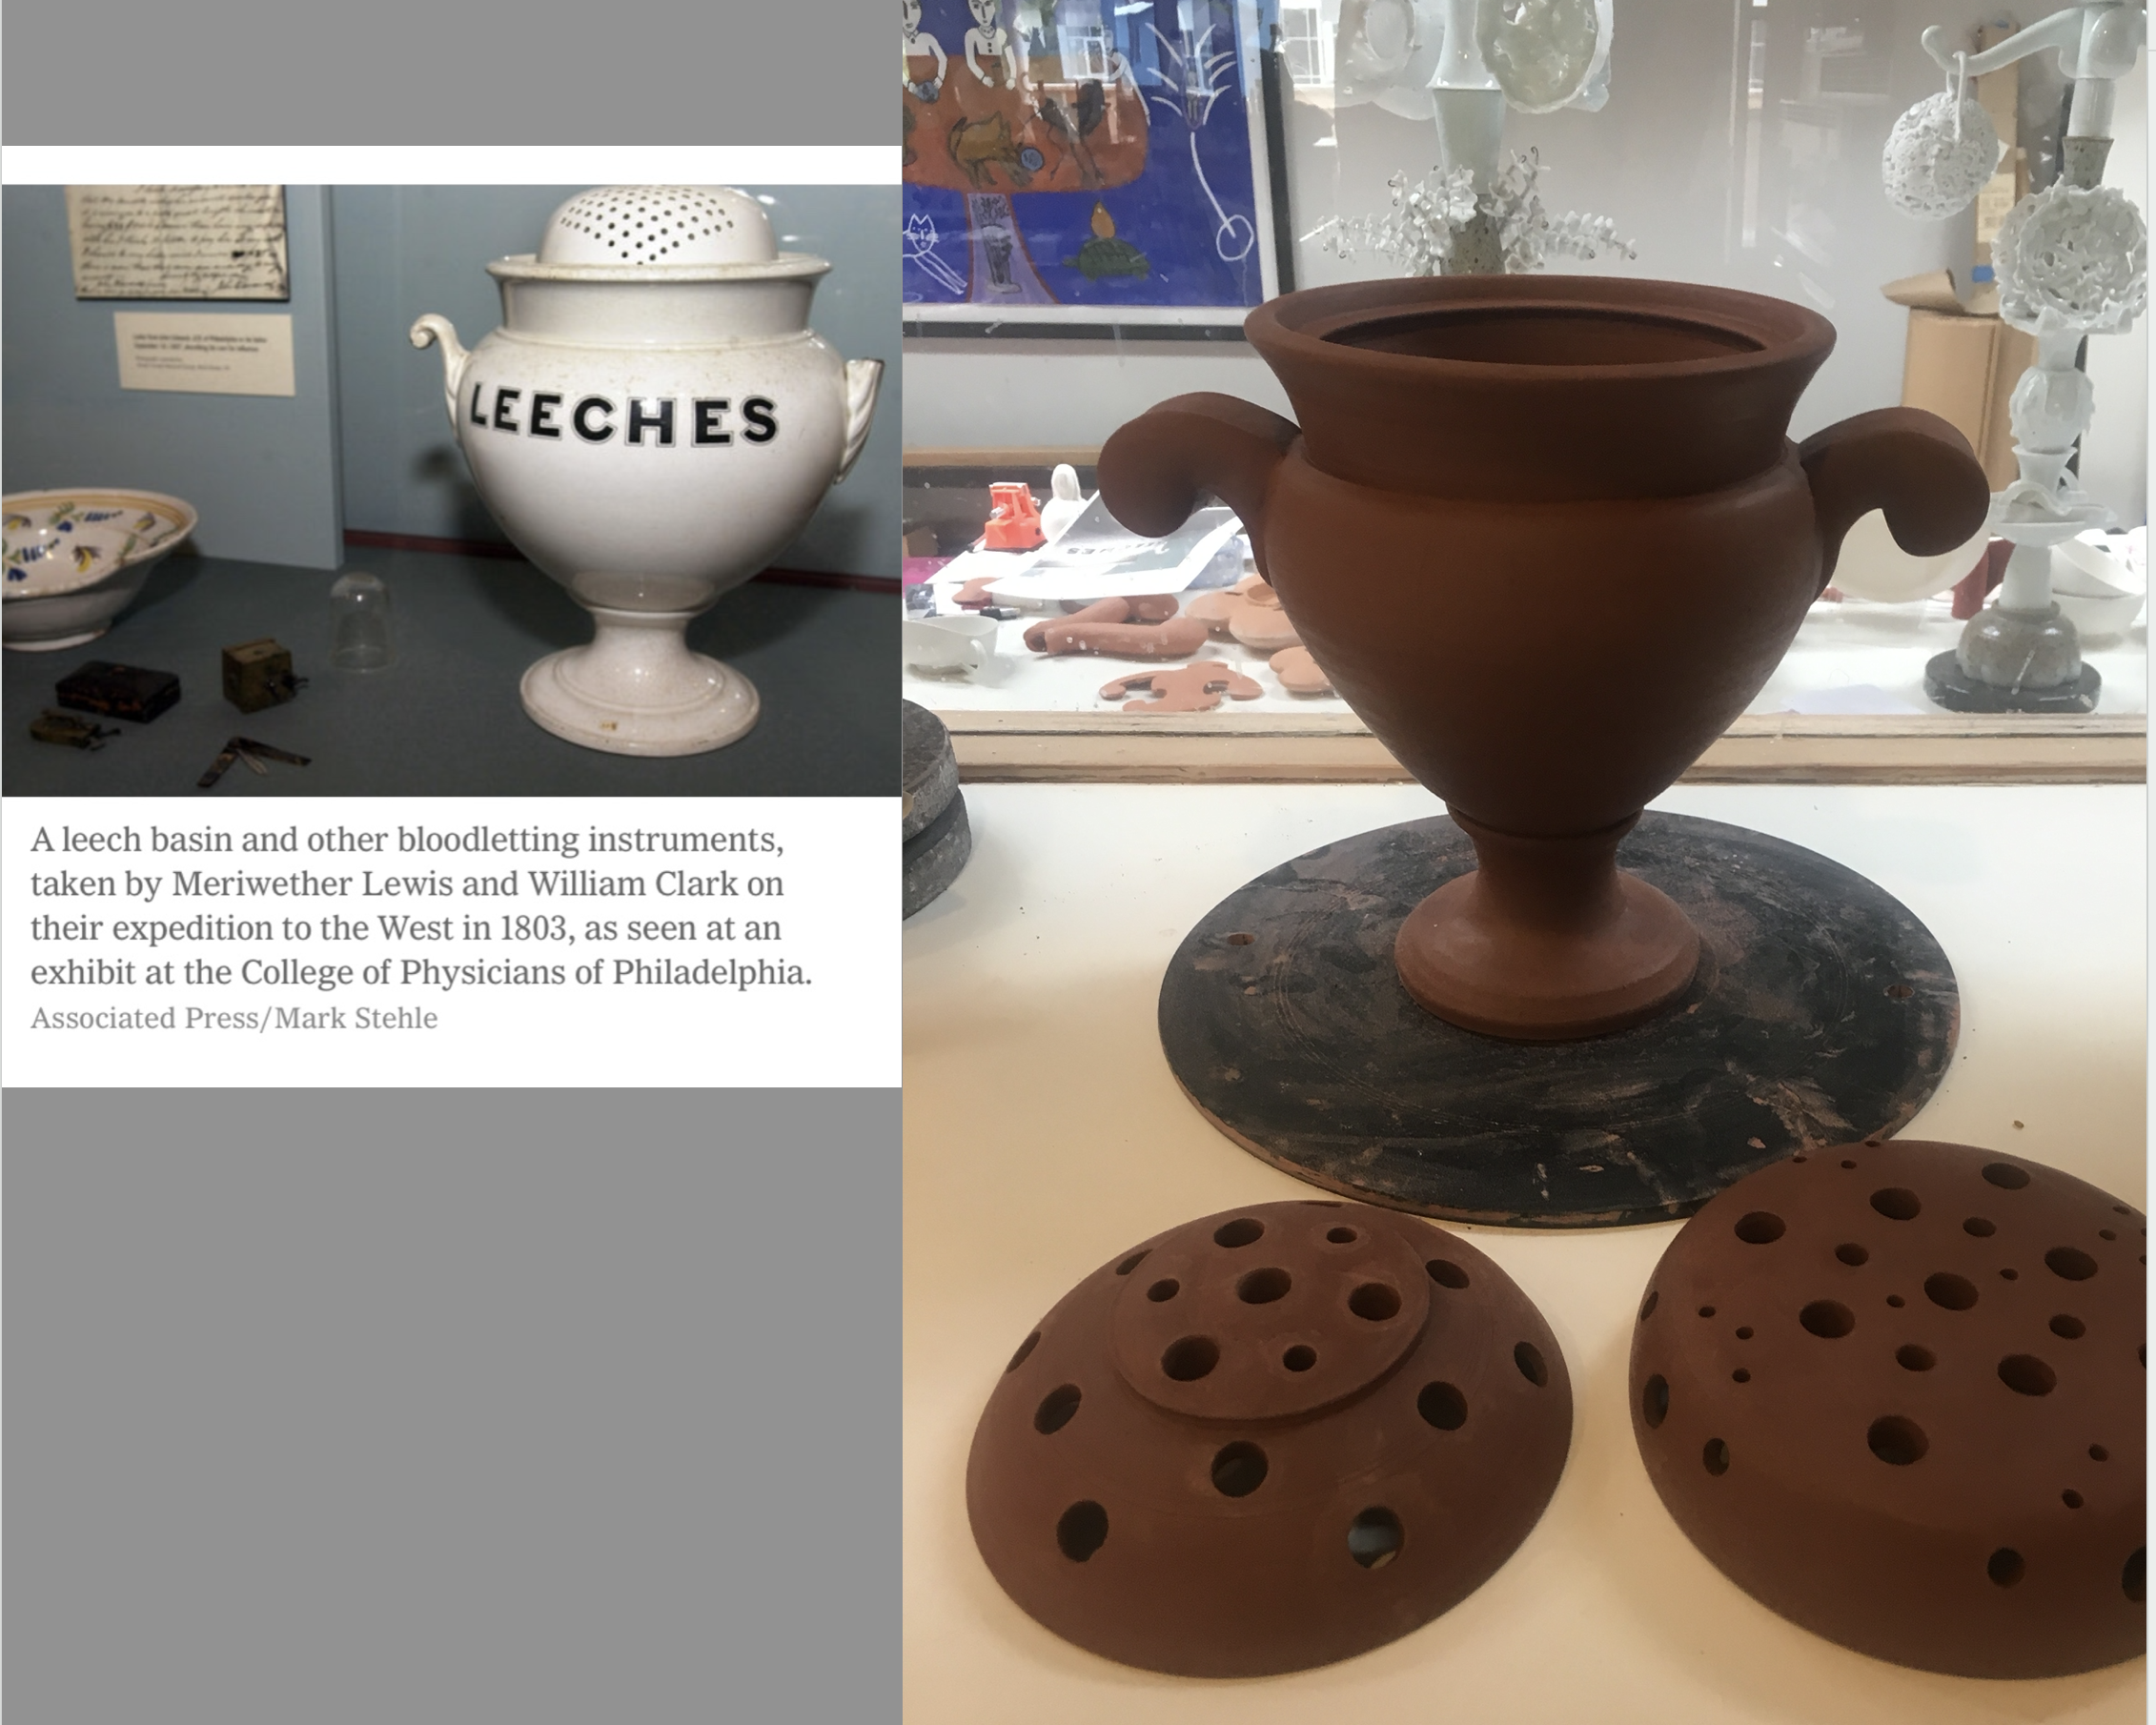  Above is the New York Times image that introduced me to a new kind of vessel:  Leech Basin.  On the right:  the vessel in progress with two lid options or a base and a lid. 